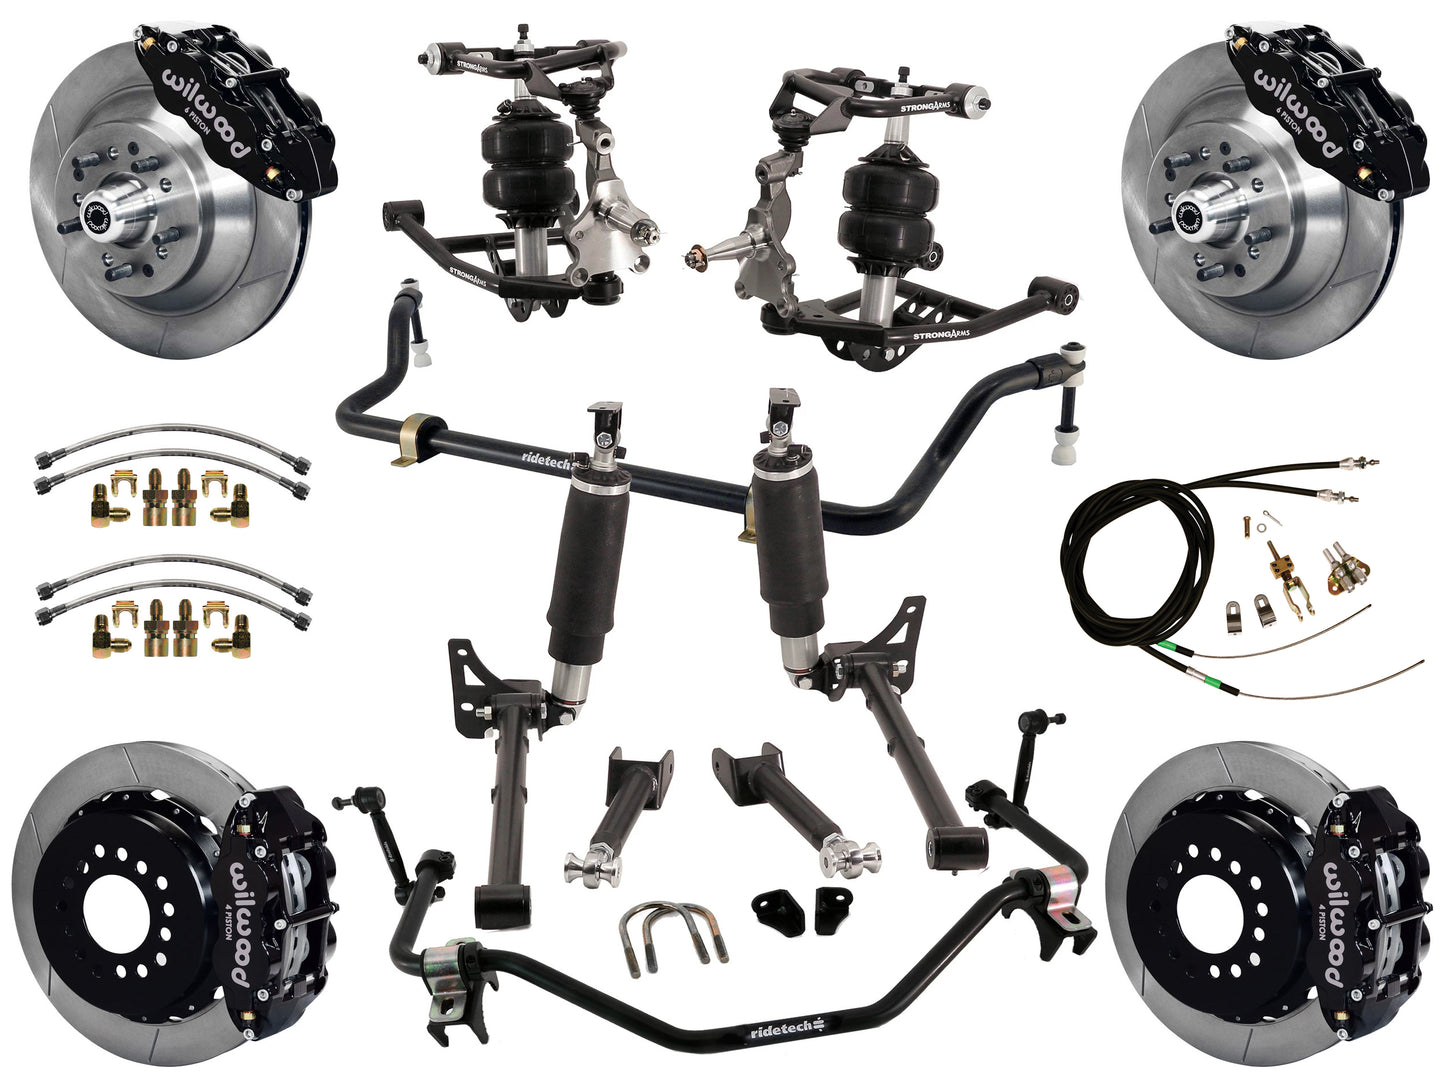 AIR RIDE SYSTEM,ARMS,BARS,WILWOOD 13" BRAKES,BLACK CALIPERS,68-72 GM A-BODY